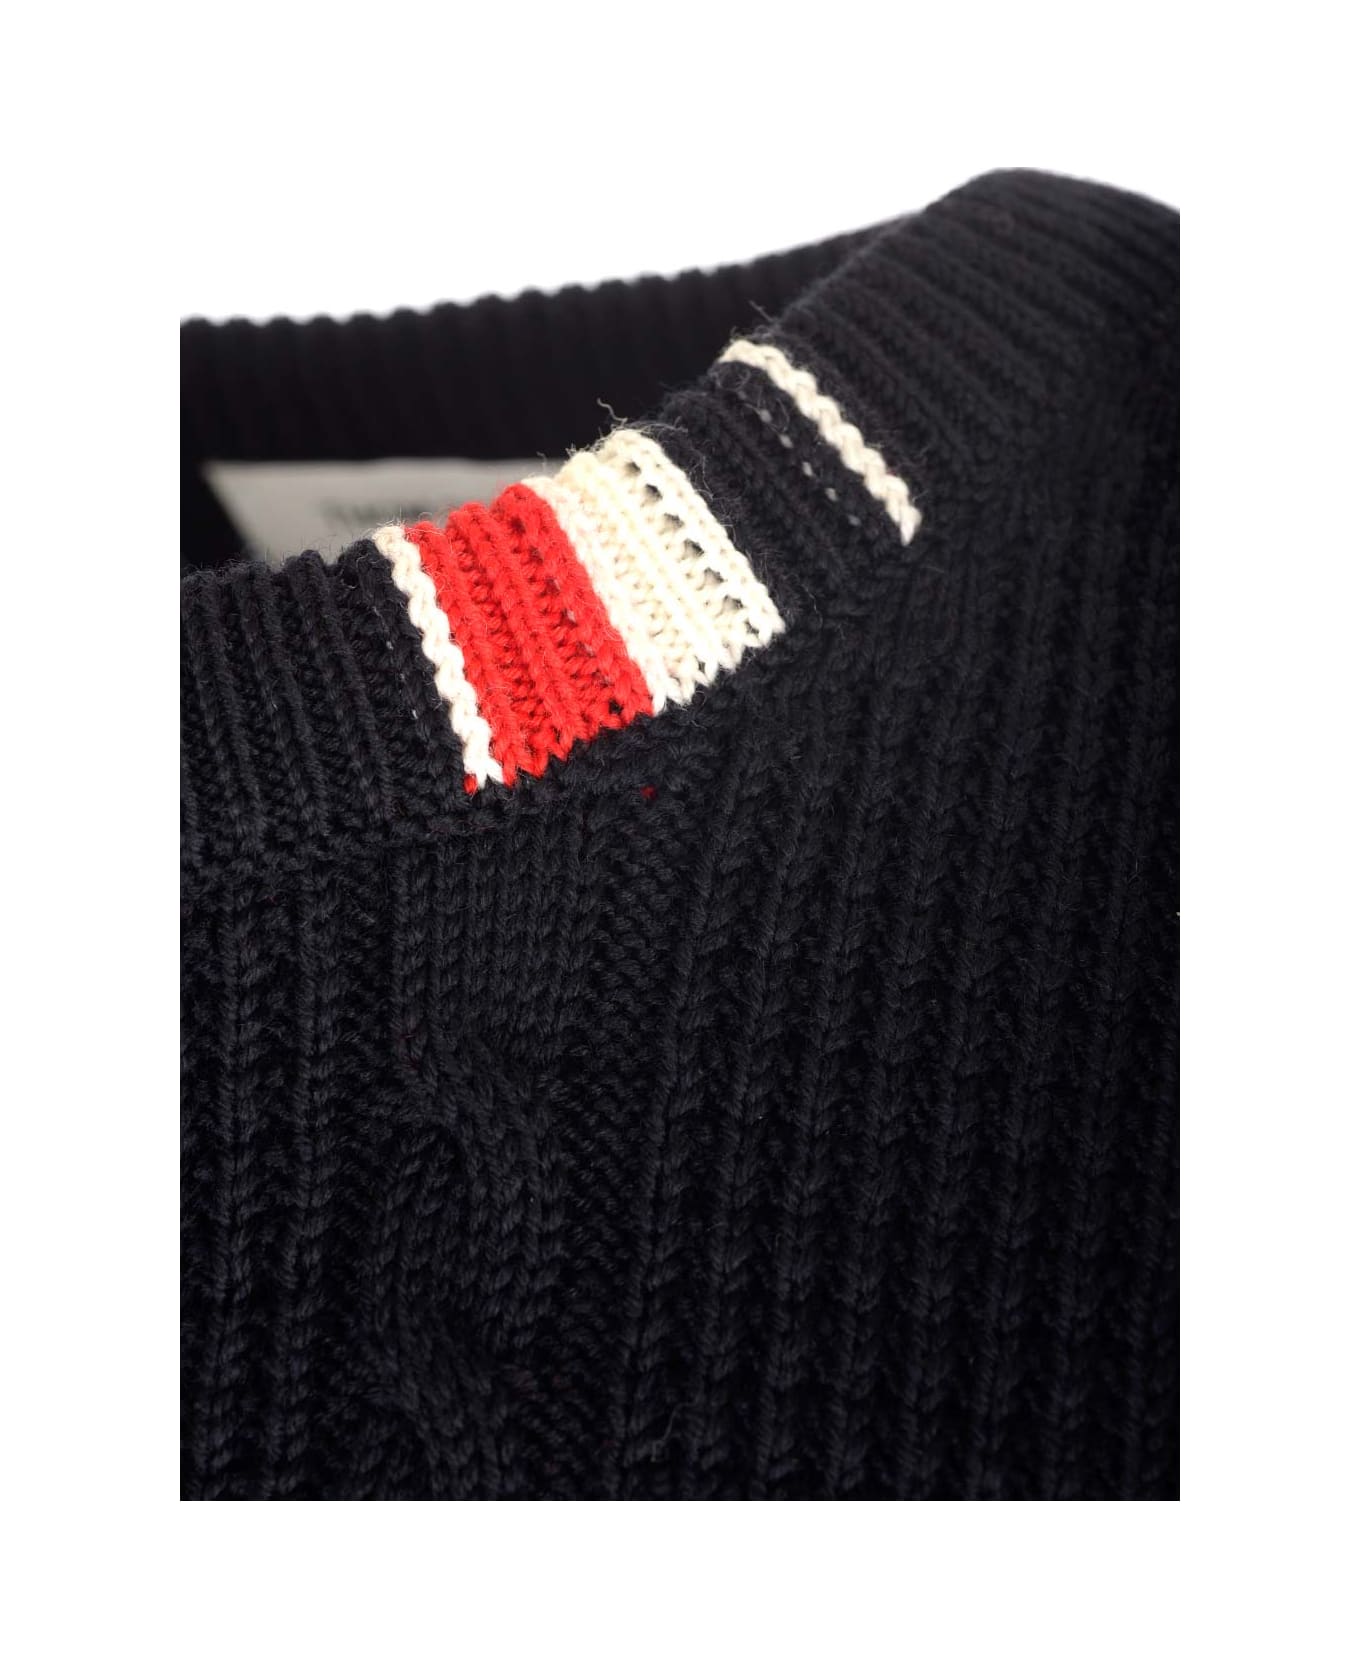 Thom Browne Blue Wool Sweater With Cables - Navy ニットウェア